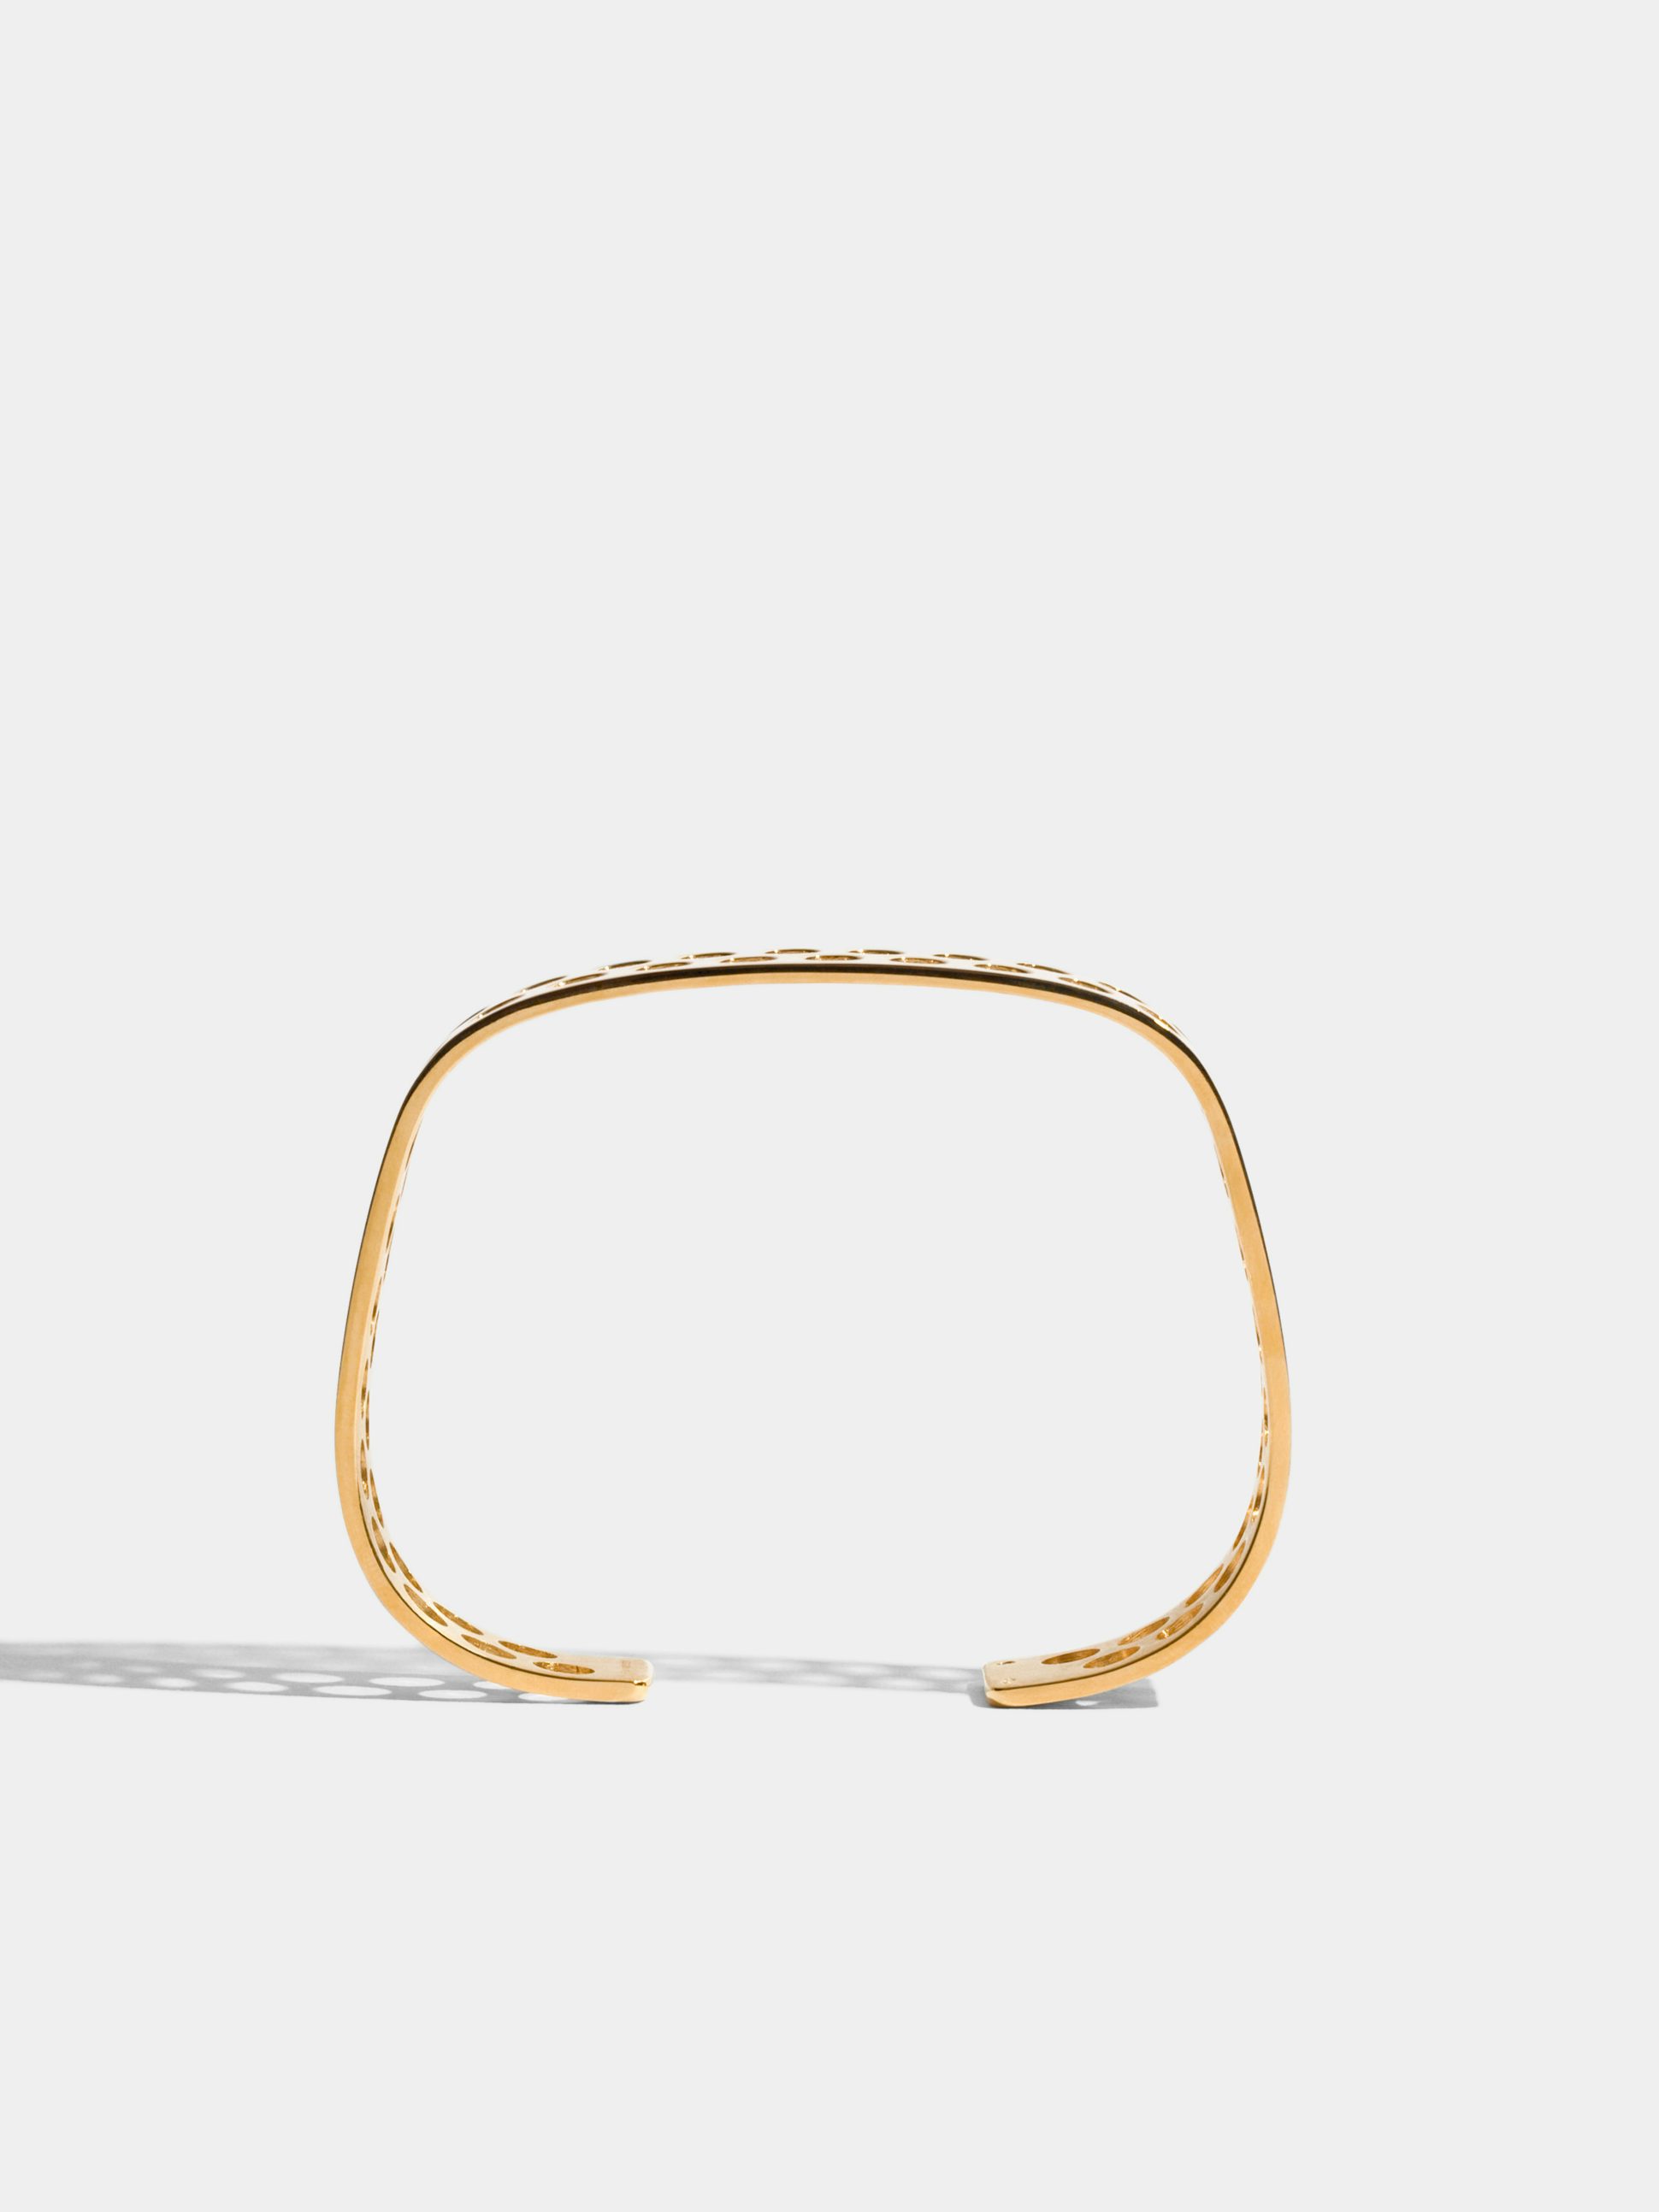 Voids, JEM by India Mahdavi, bracelet VIII in 18k Fairmined ethical yellow gold (2 rows, large perforations)